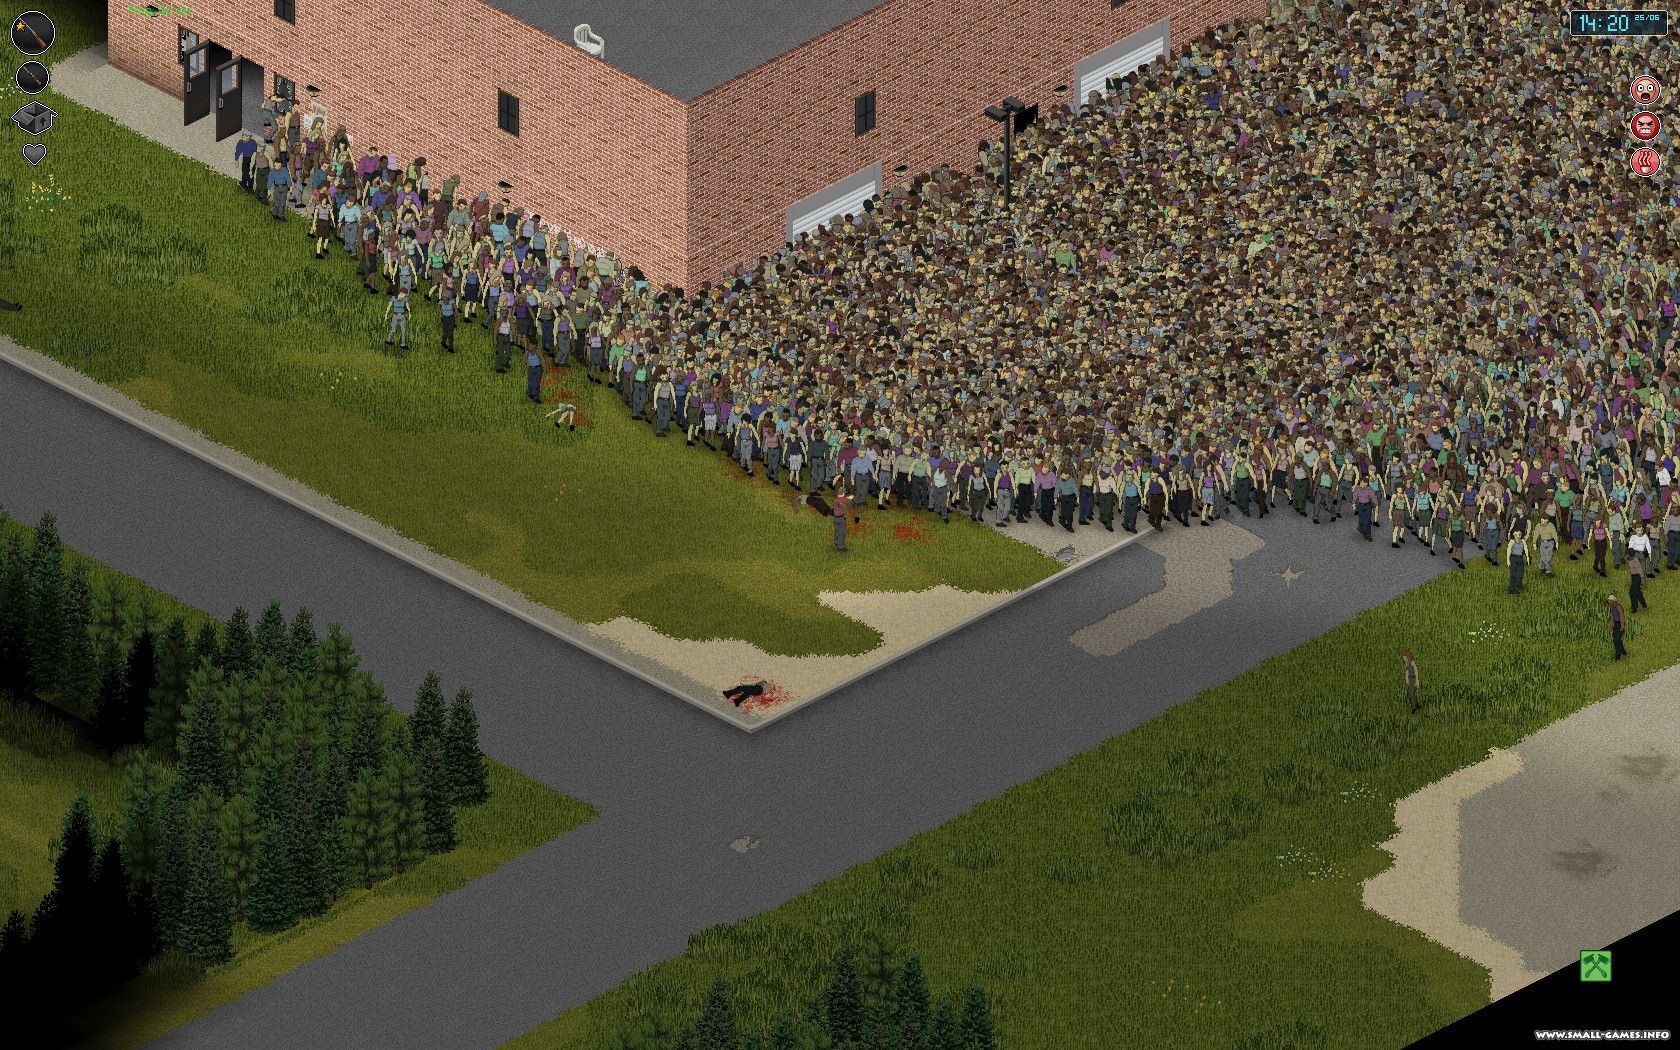 project zomboid best build download